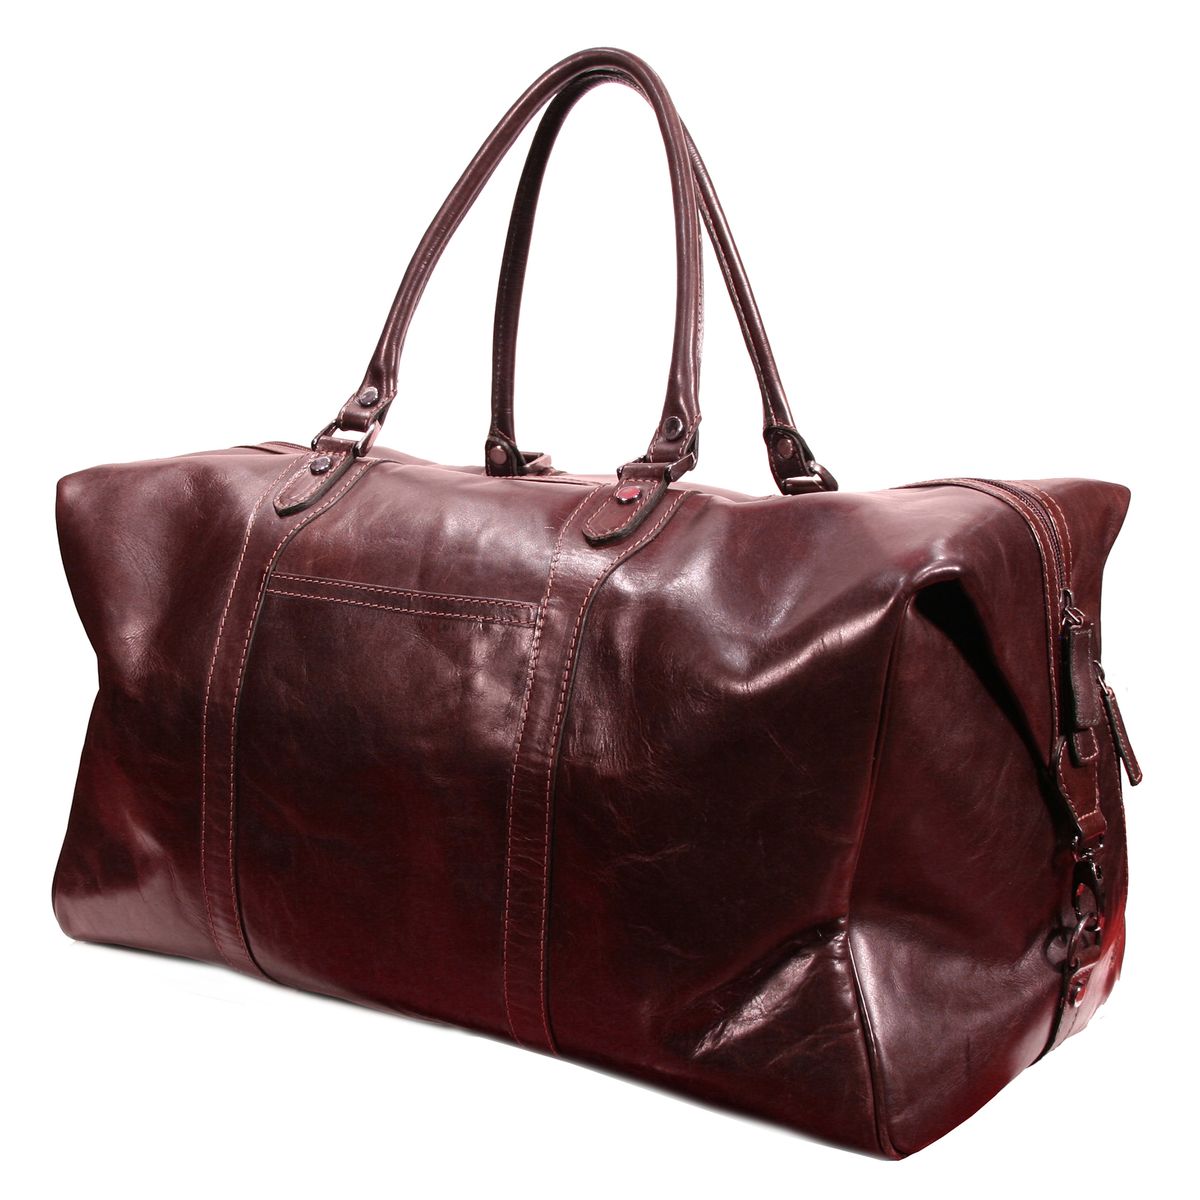 NUVO - (Nouveau) Genuine Leather PLYMOUTH Travel duffle bag Brown ...